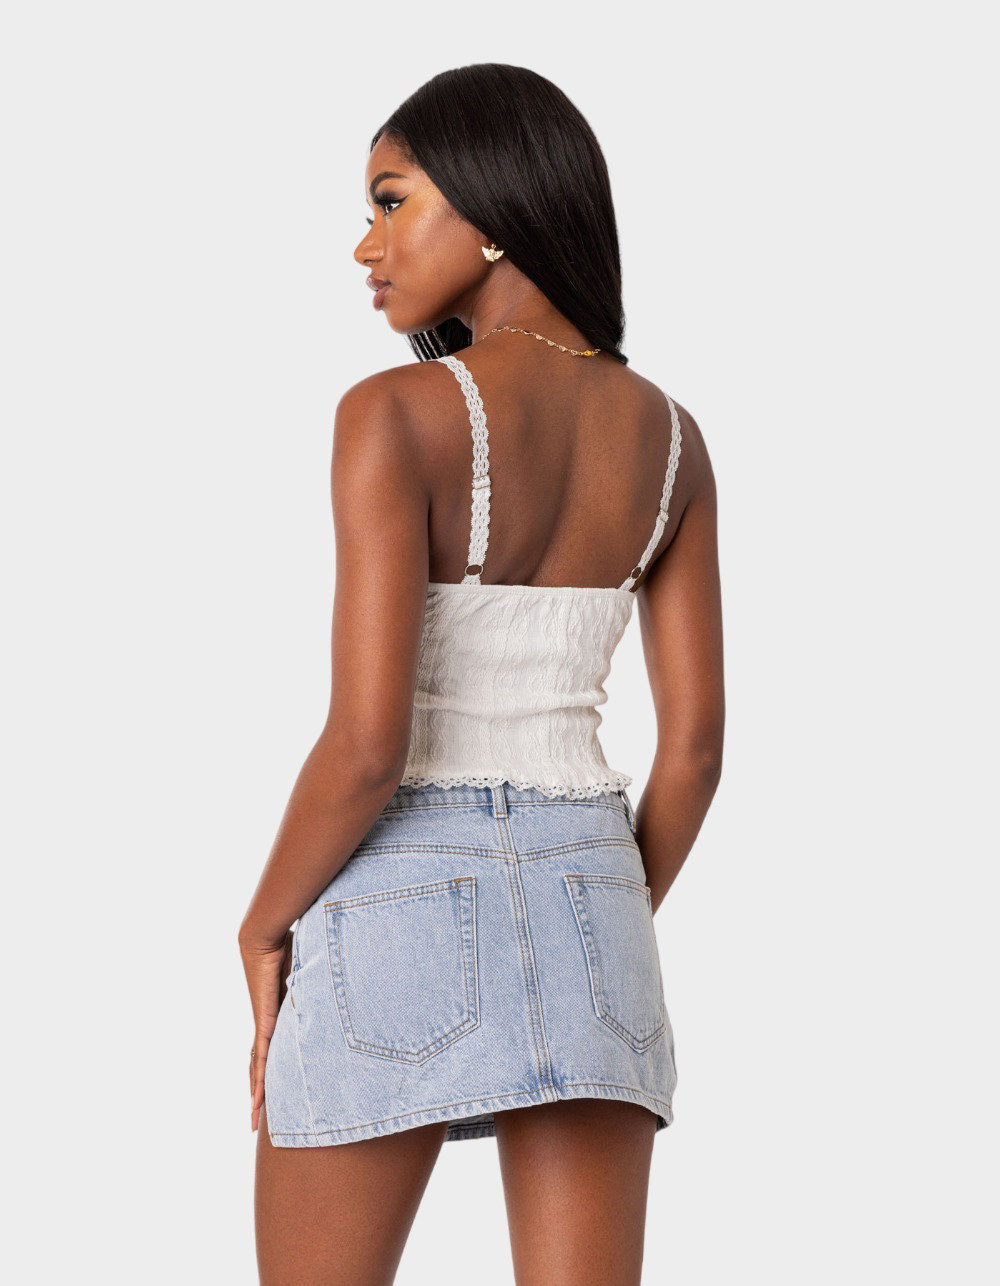 EDIKTED Lacey Knit Womens Tank Top - WHITE | Tillys